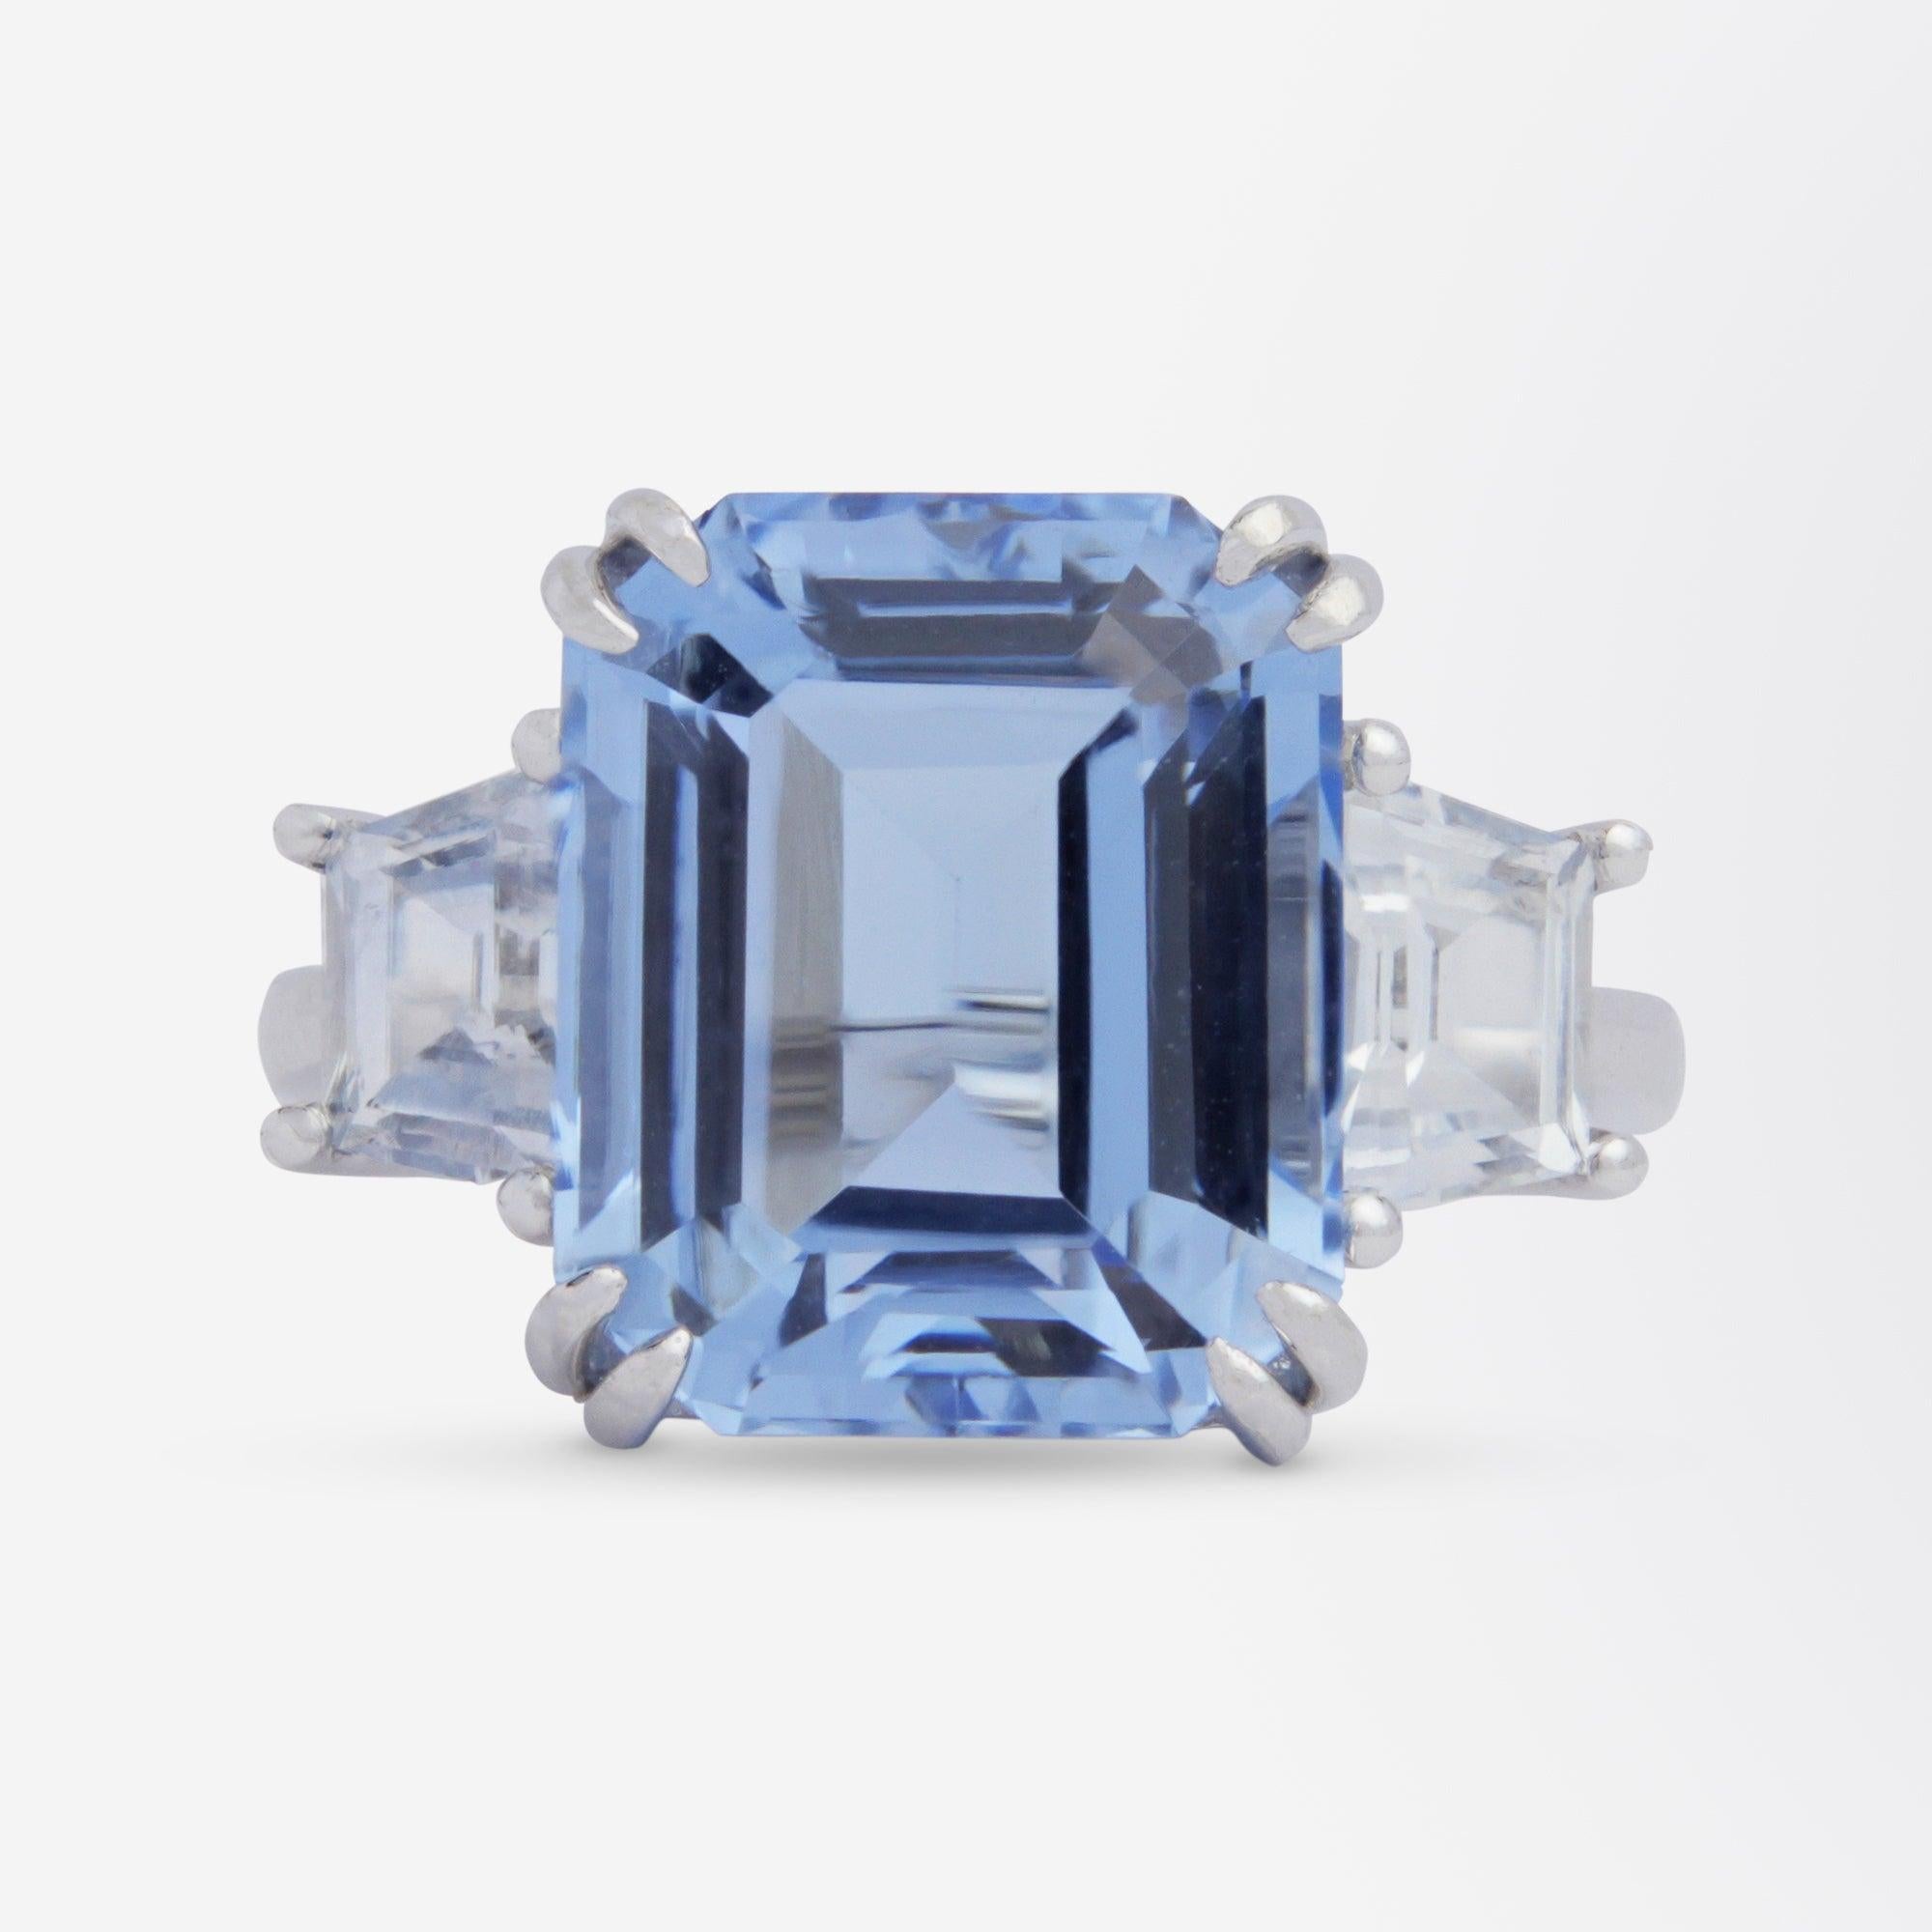 An excellent aquamarine and white sapphire cocktail ring set in 18 karat white gold. The ring centres on a 7.05 carat emerald cut aquamarine which is 'bright mid blue' and 'eye clean'. The shoulders of the ring are each set with a single white (or